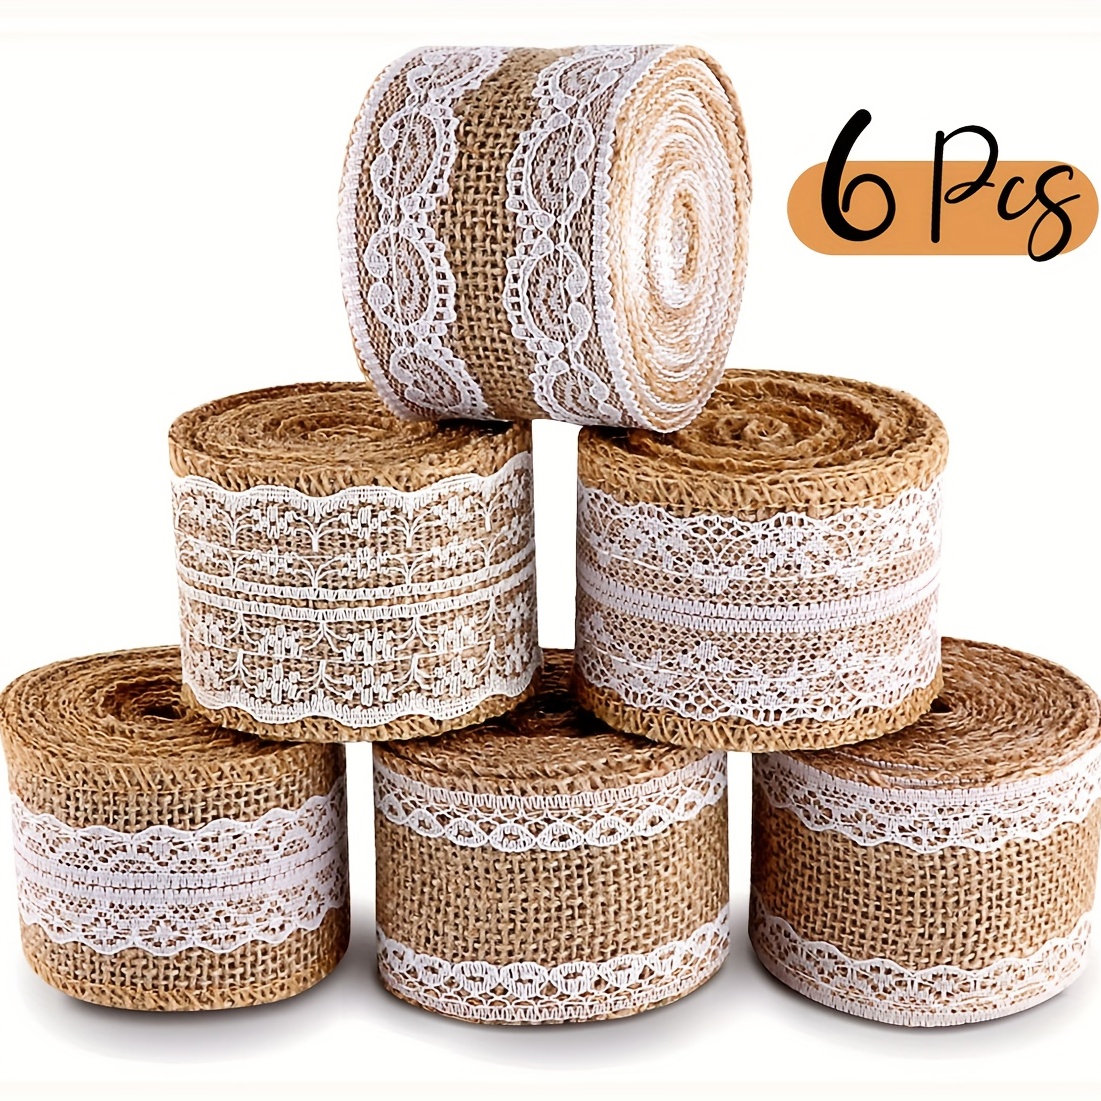 3 Rolls Christmas Burlap Jute Fabric Wired Ribbon 1/2/3 Inch by 10 Yards  Jute Ribbon Linen Type Cloth for Arts Crafts Homemade DIY Projects, Event